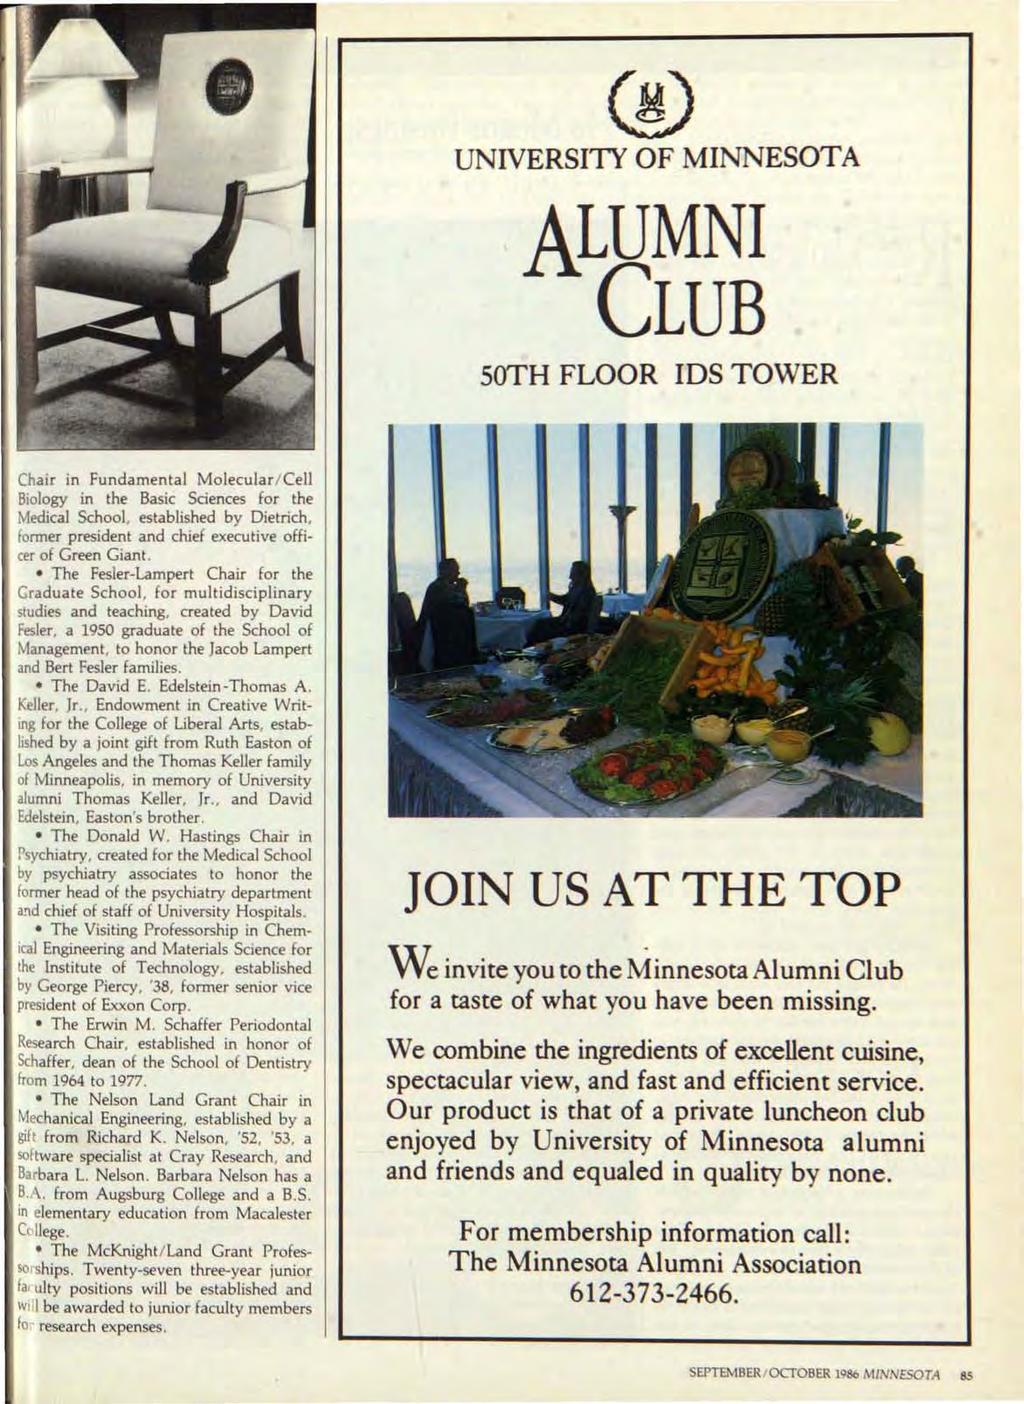 00 UNIVERSITI OF MINNESOTA ALUMNI CLUB 50TH FLOOR IDS TOWER Chair in Fundamental Molecular/ Cell Biology in the Basic Sciences for the Medical SchooL established by Dietrich, former president and